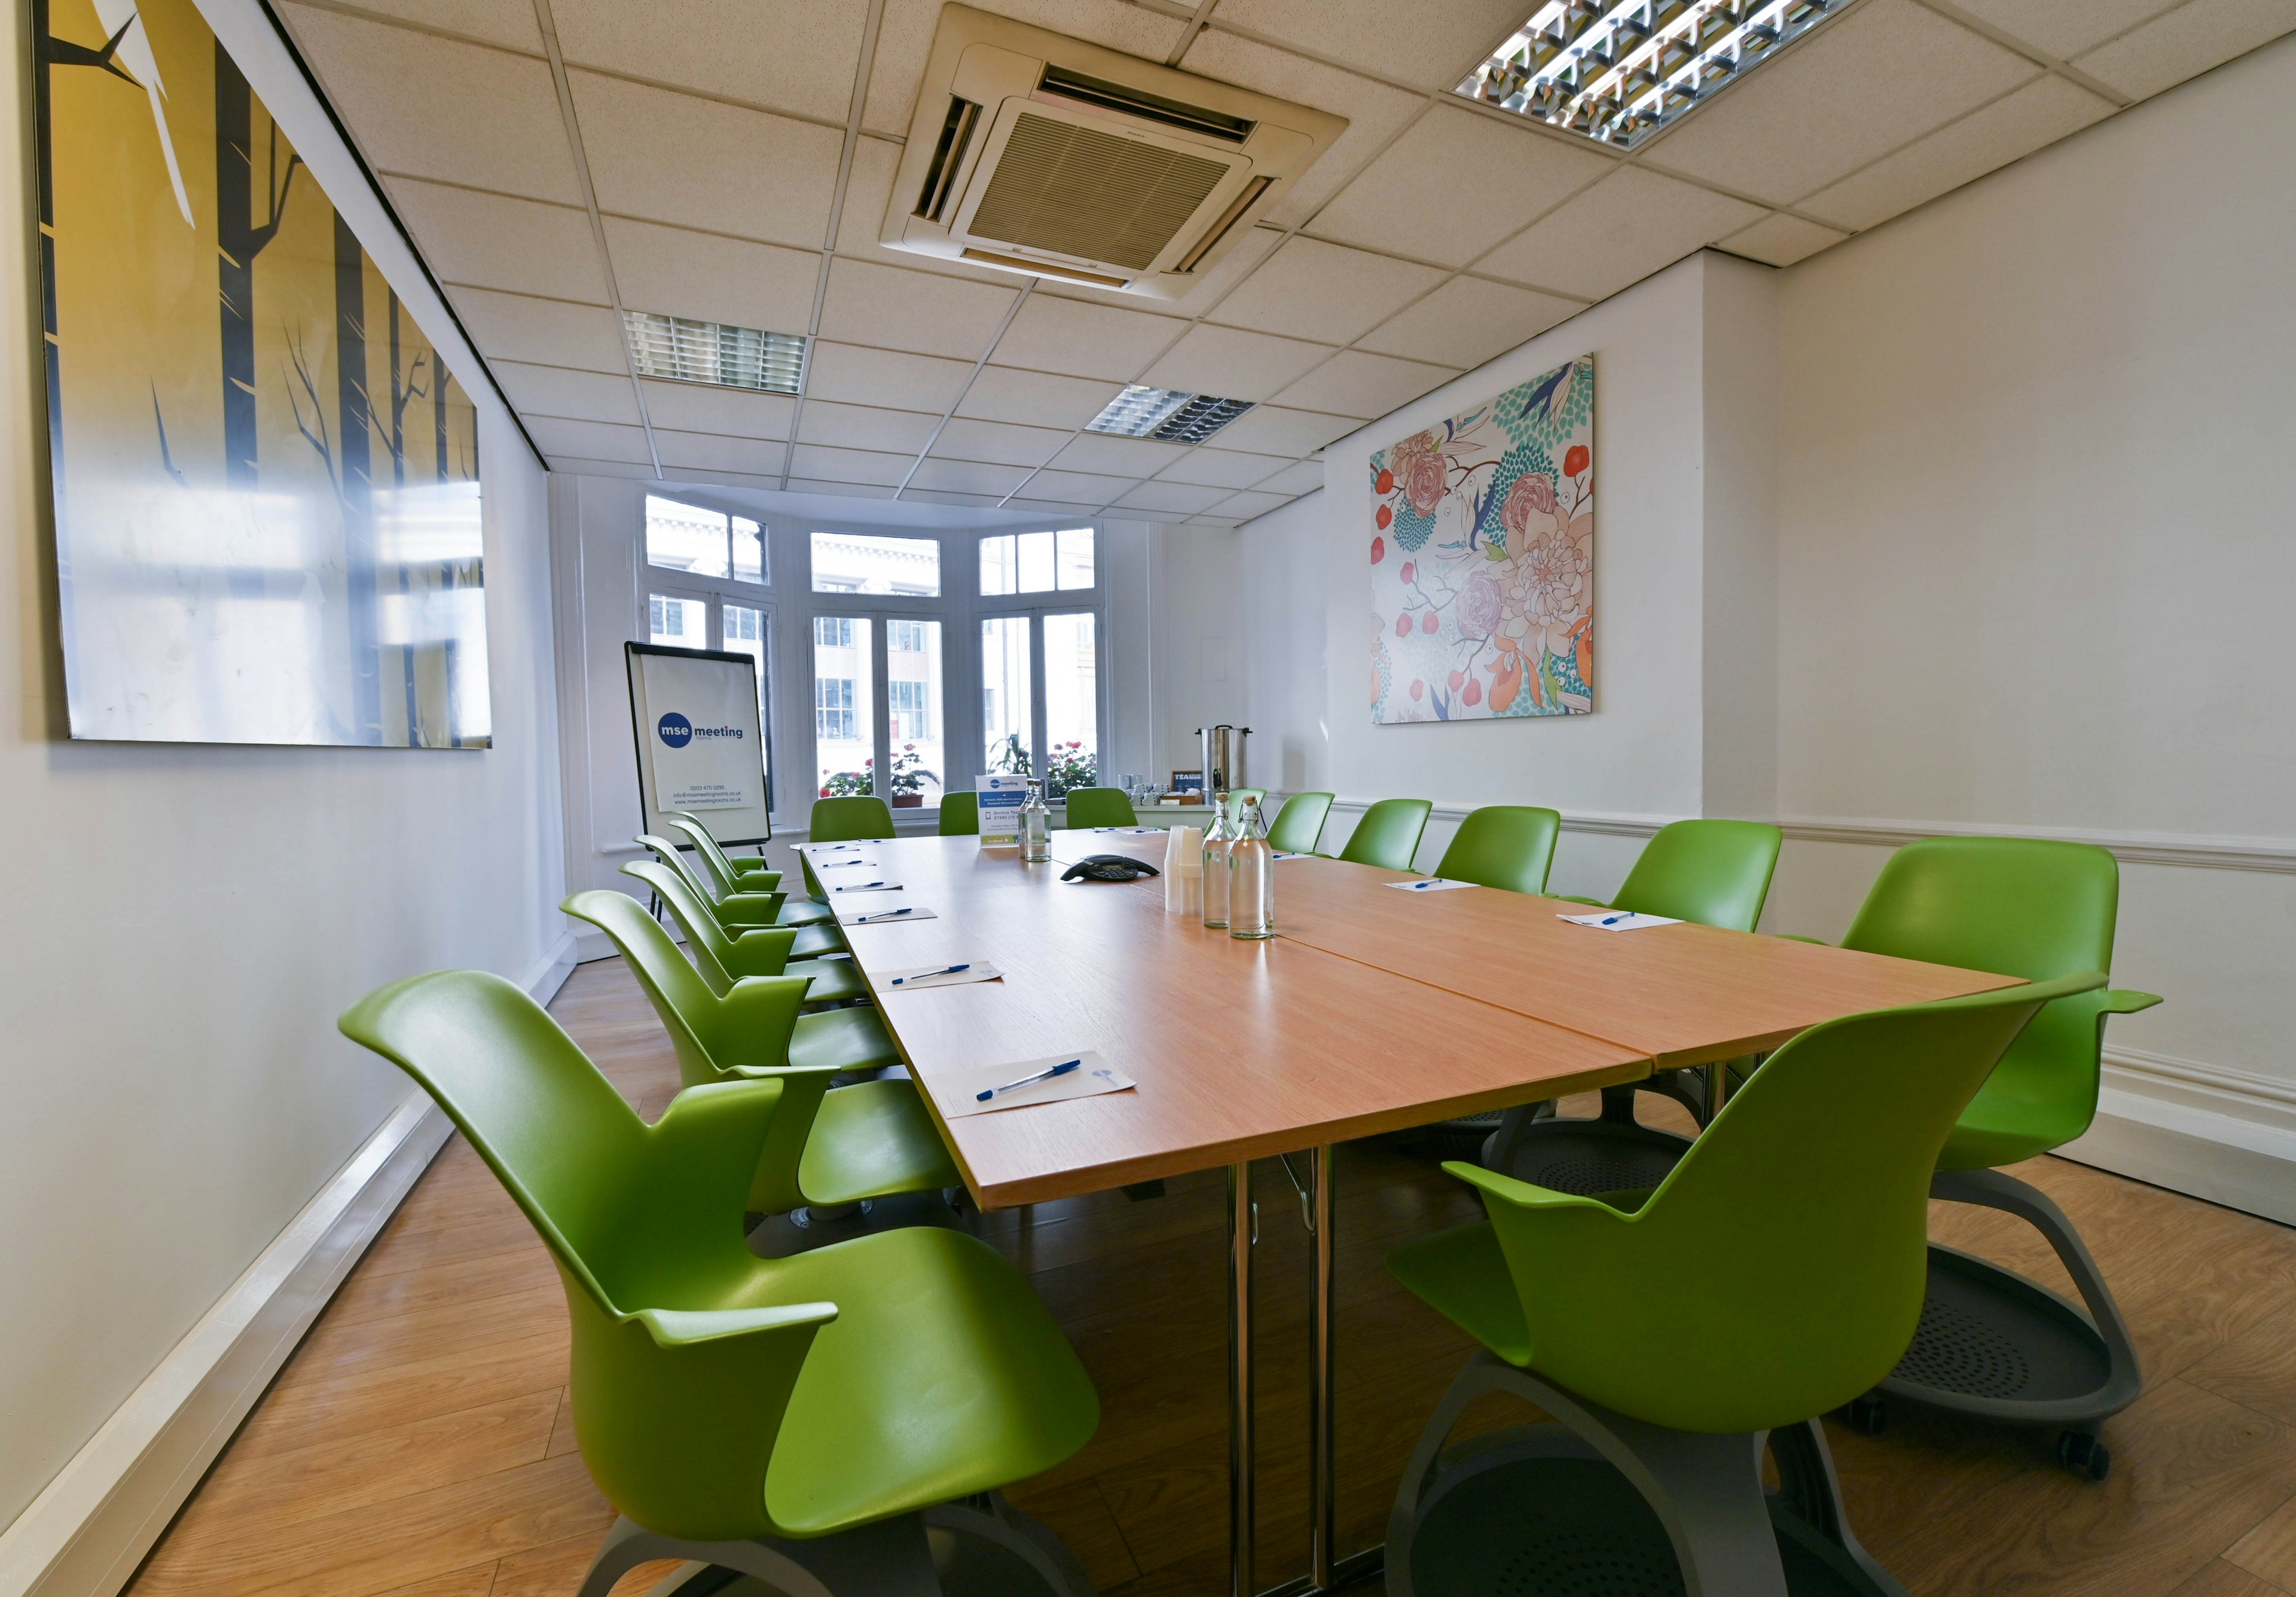 Business - MSE Meeting Rooms - Tottenham Court Road